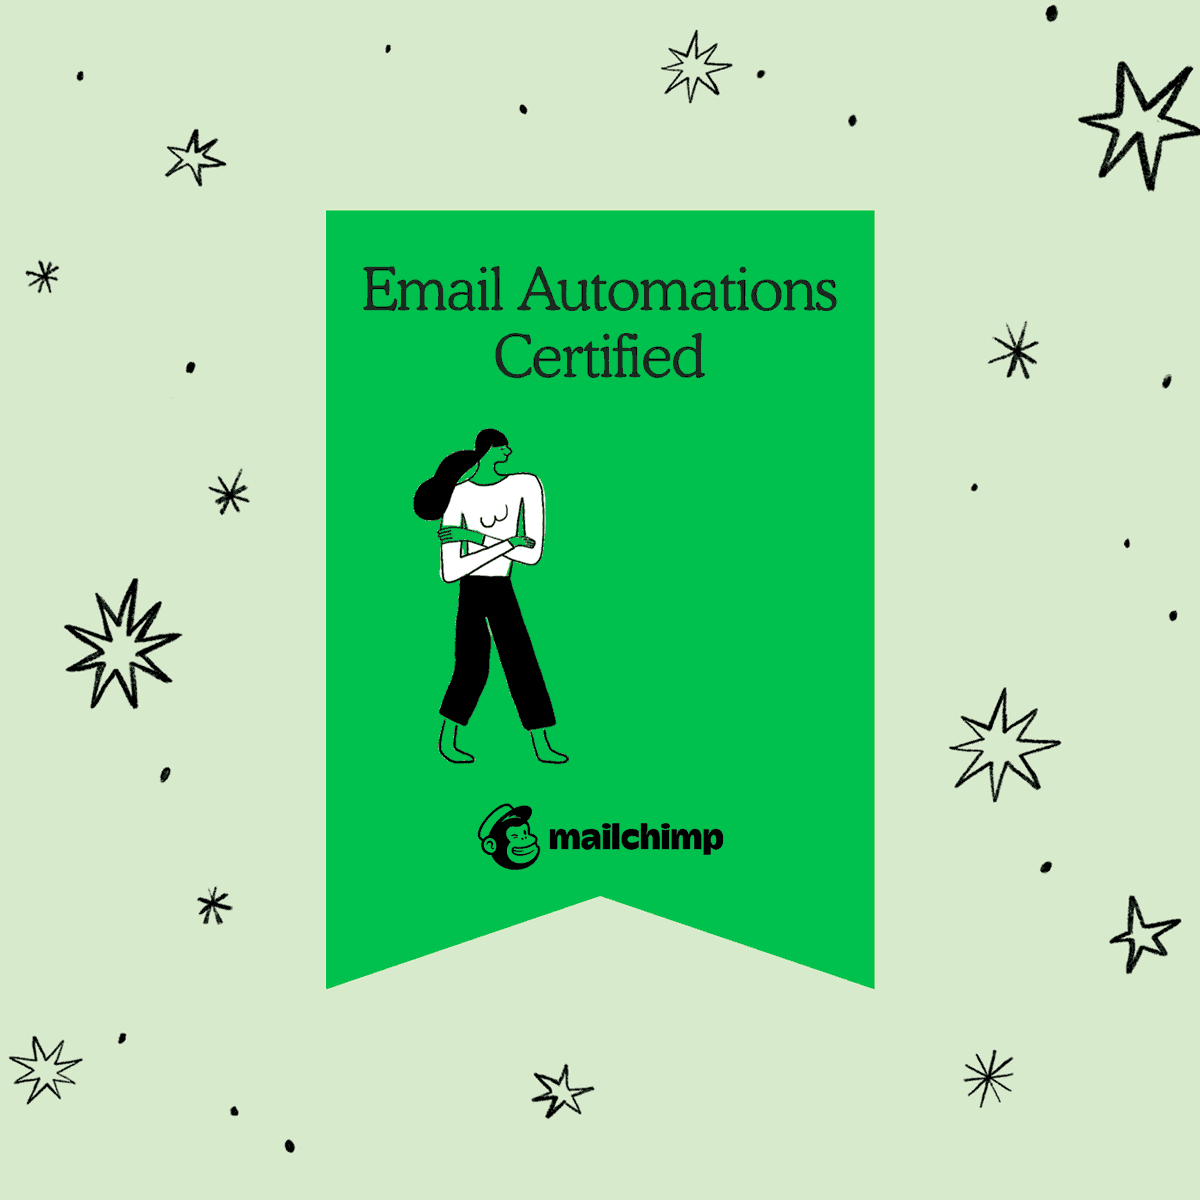 mailchimp-email-automations-certification